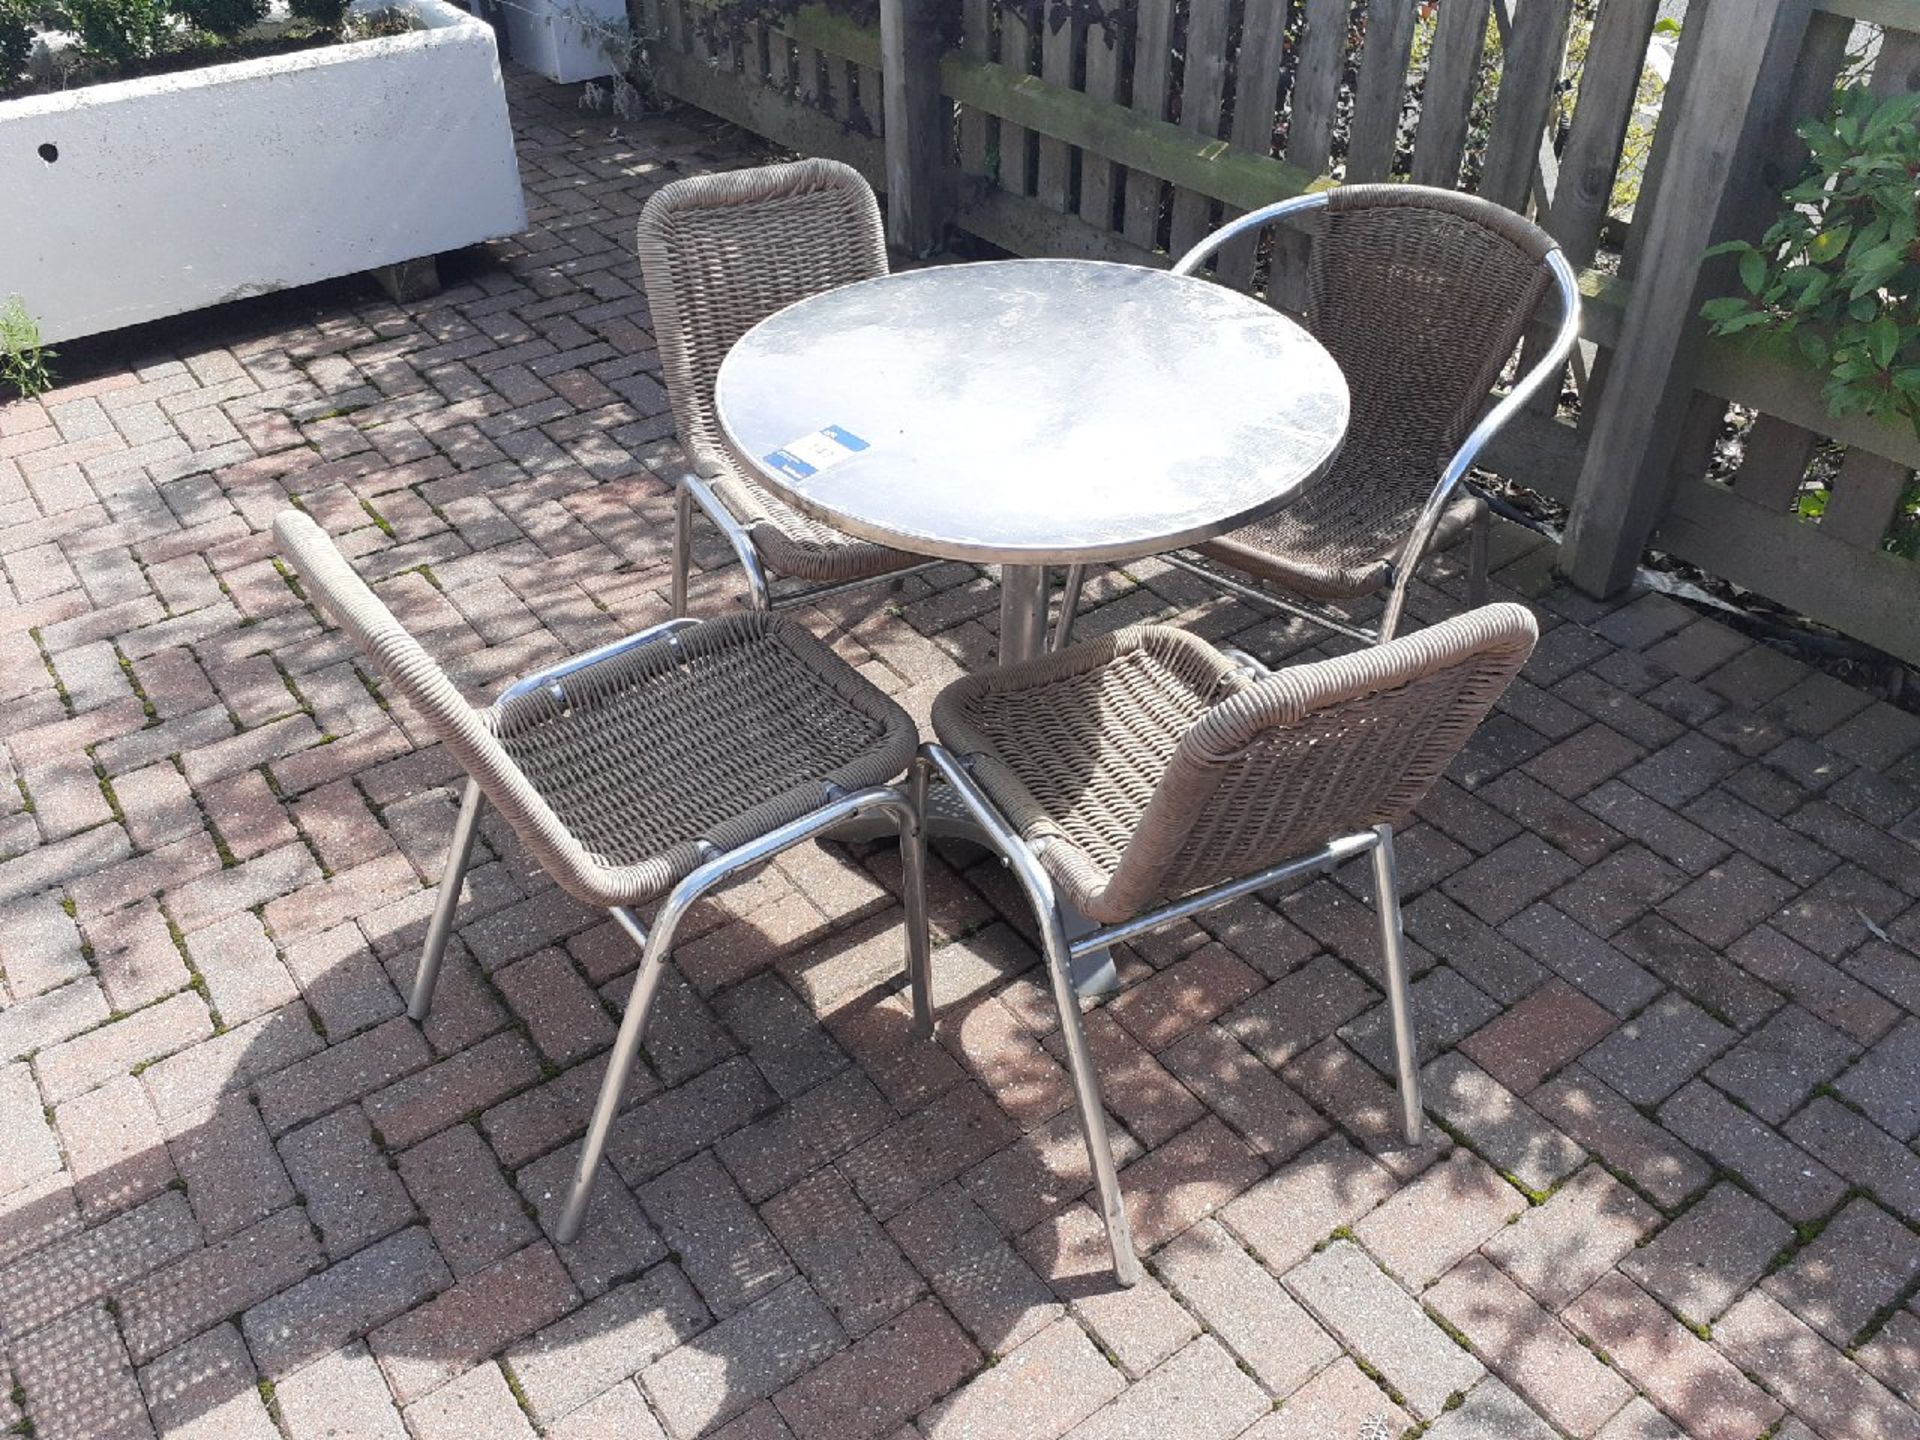 Metal Frame Circular Top Garden Table with 4 x Metal Framed Garden Chairs - Image 2 of 2